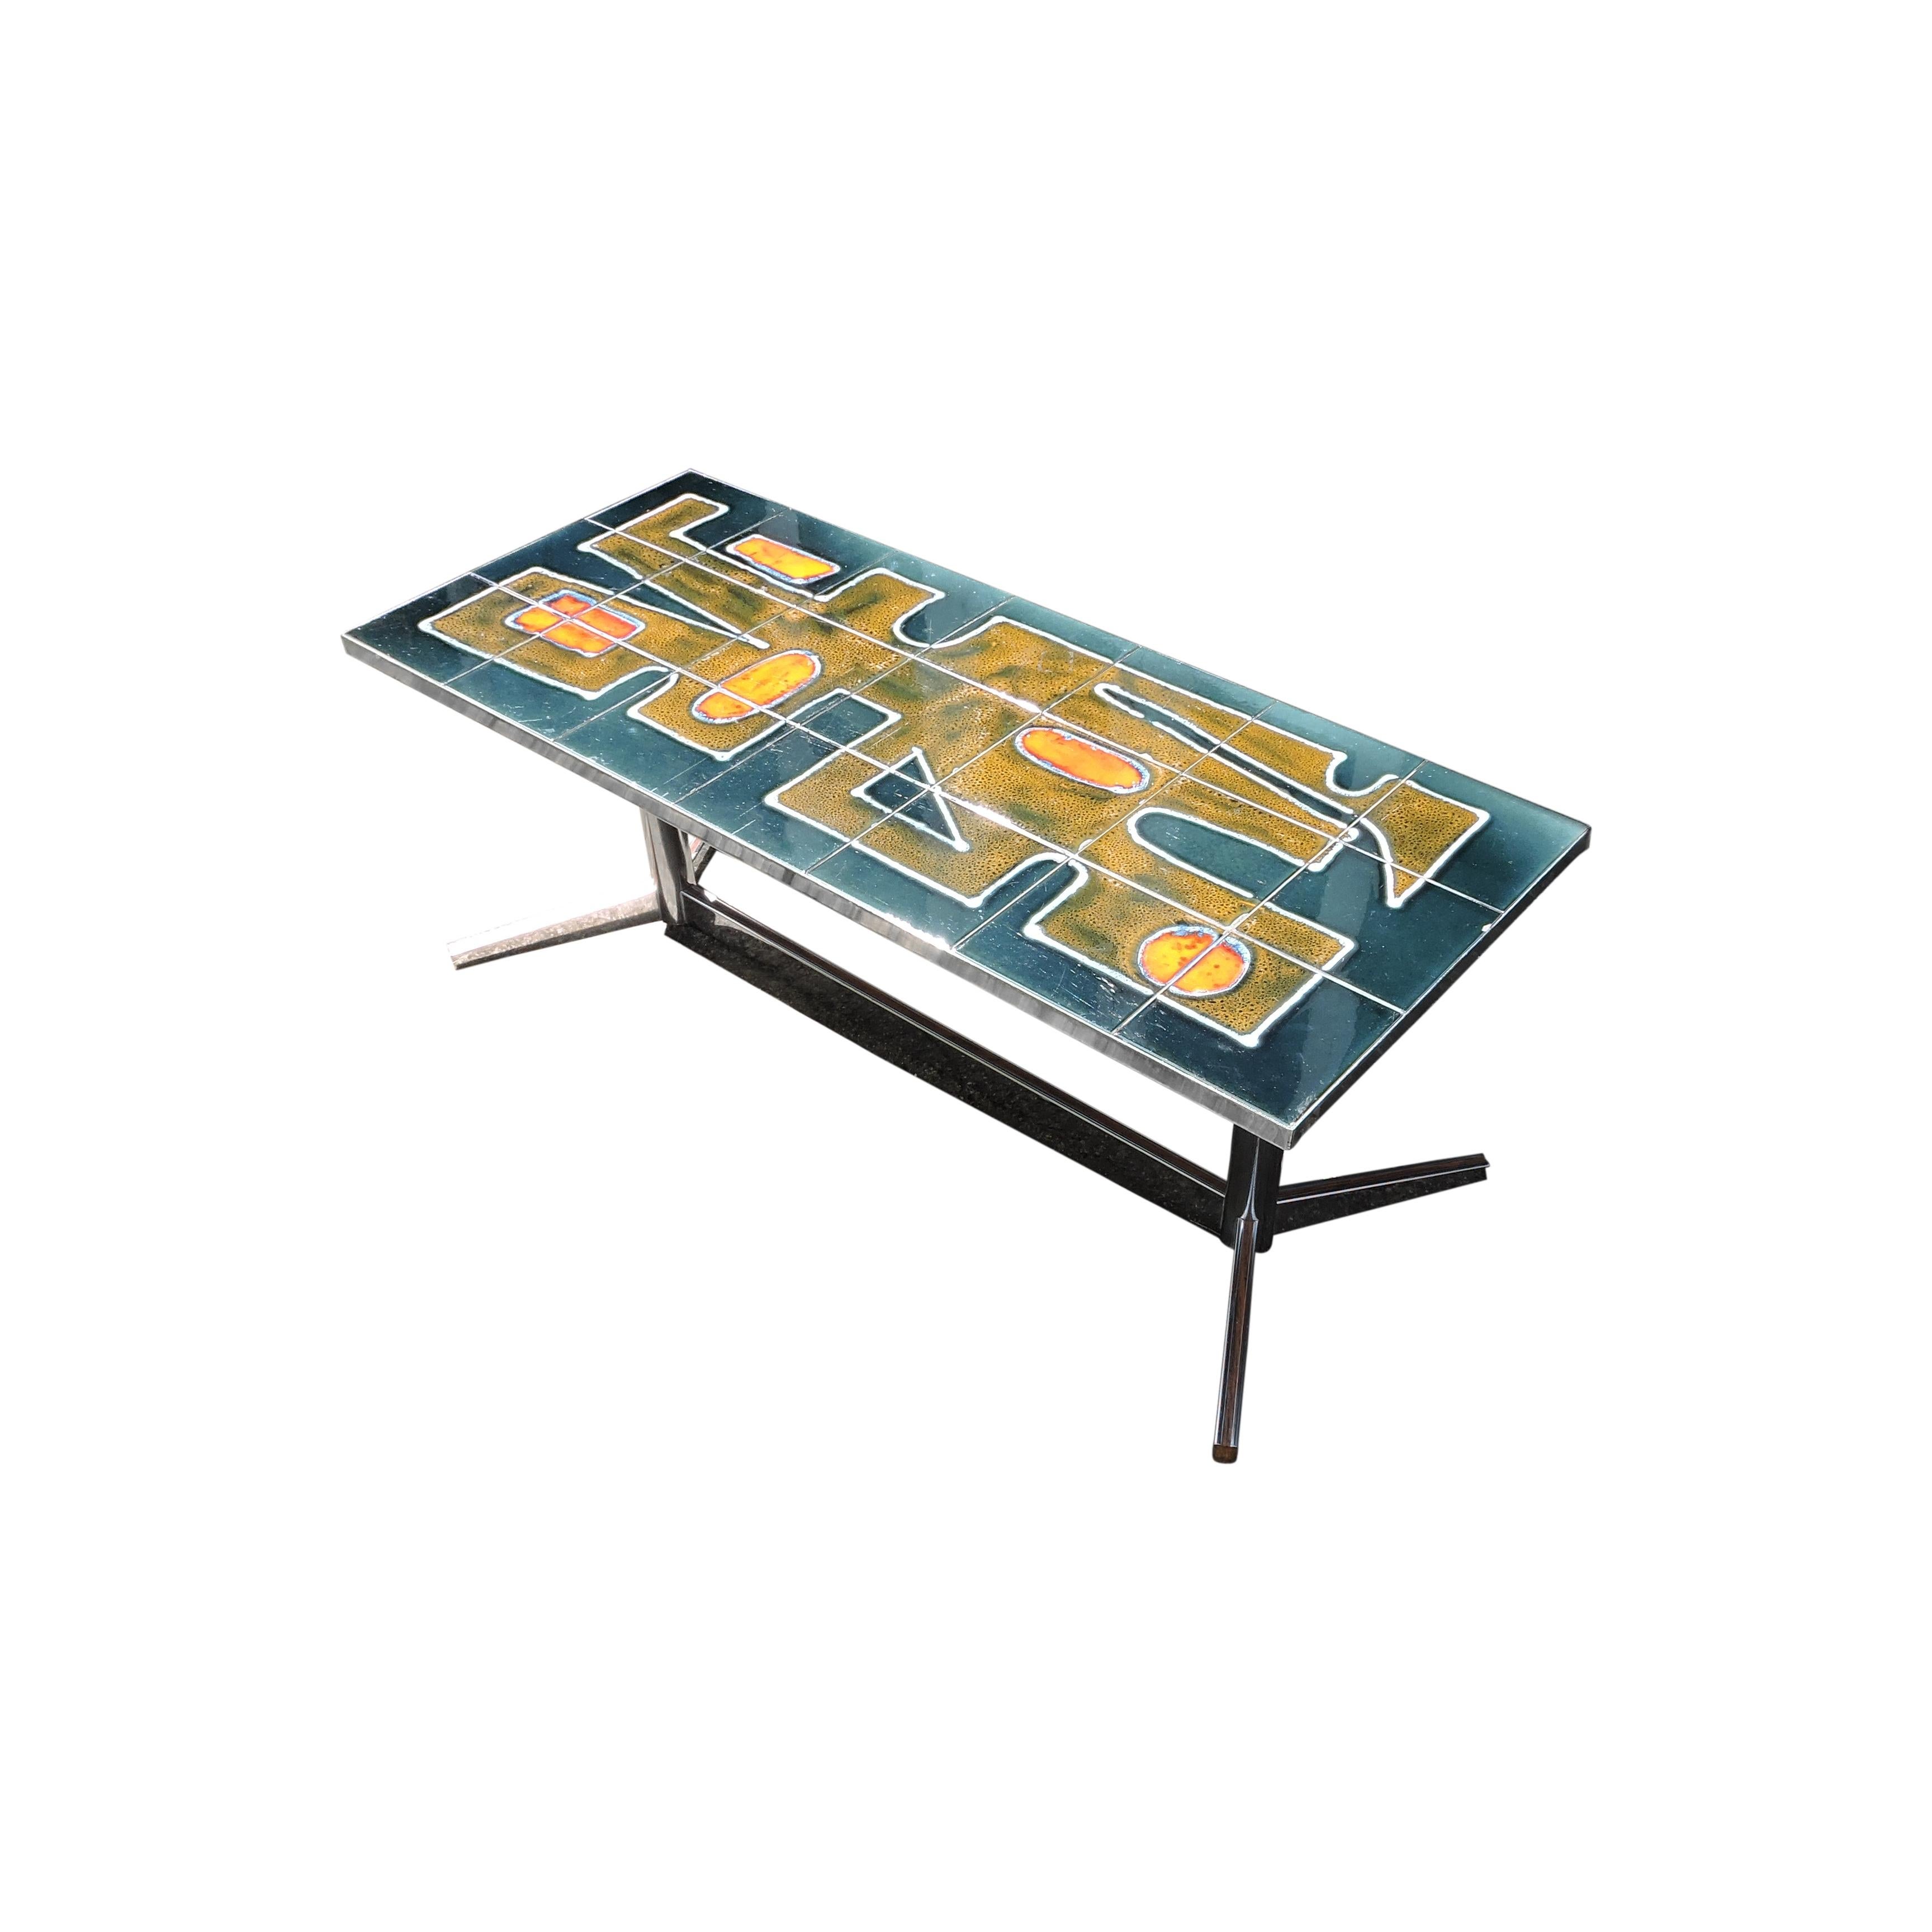 A tiled coffee table from the 1960s featuring glazed blue, green and orange tiles on a chrome table stand.